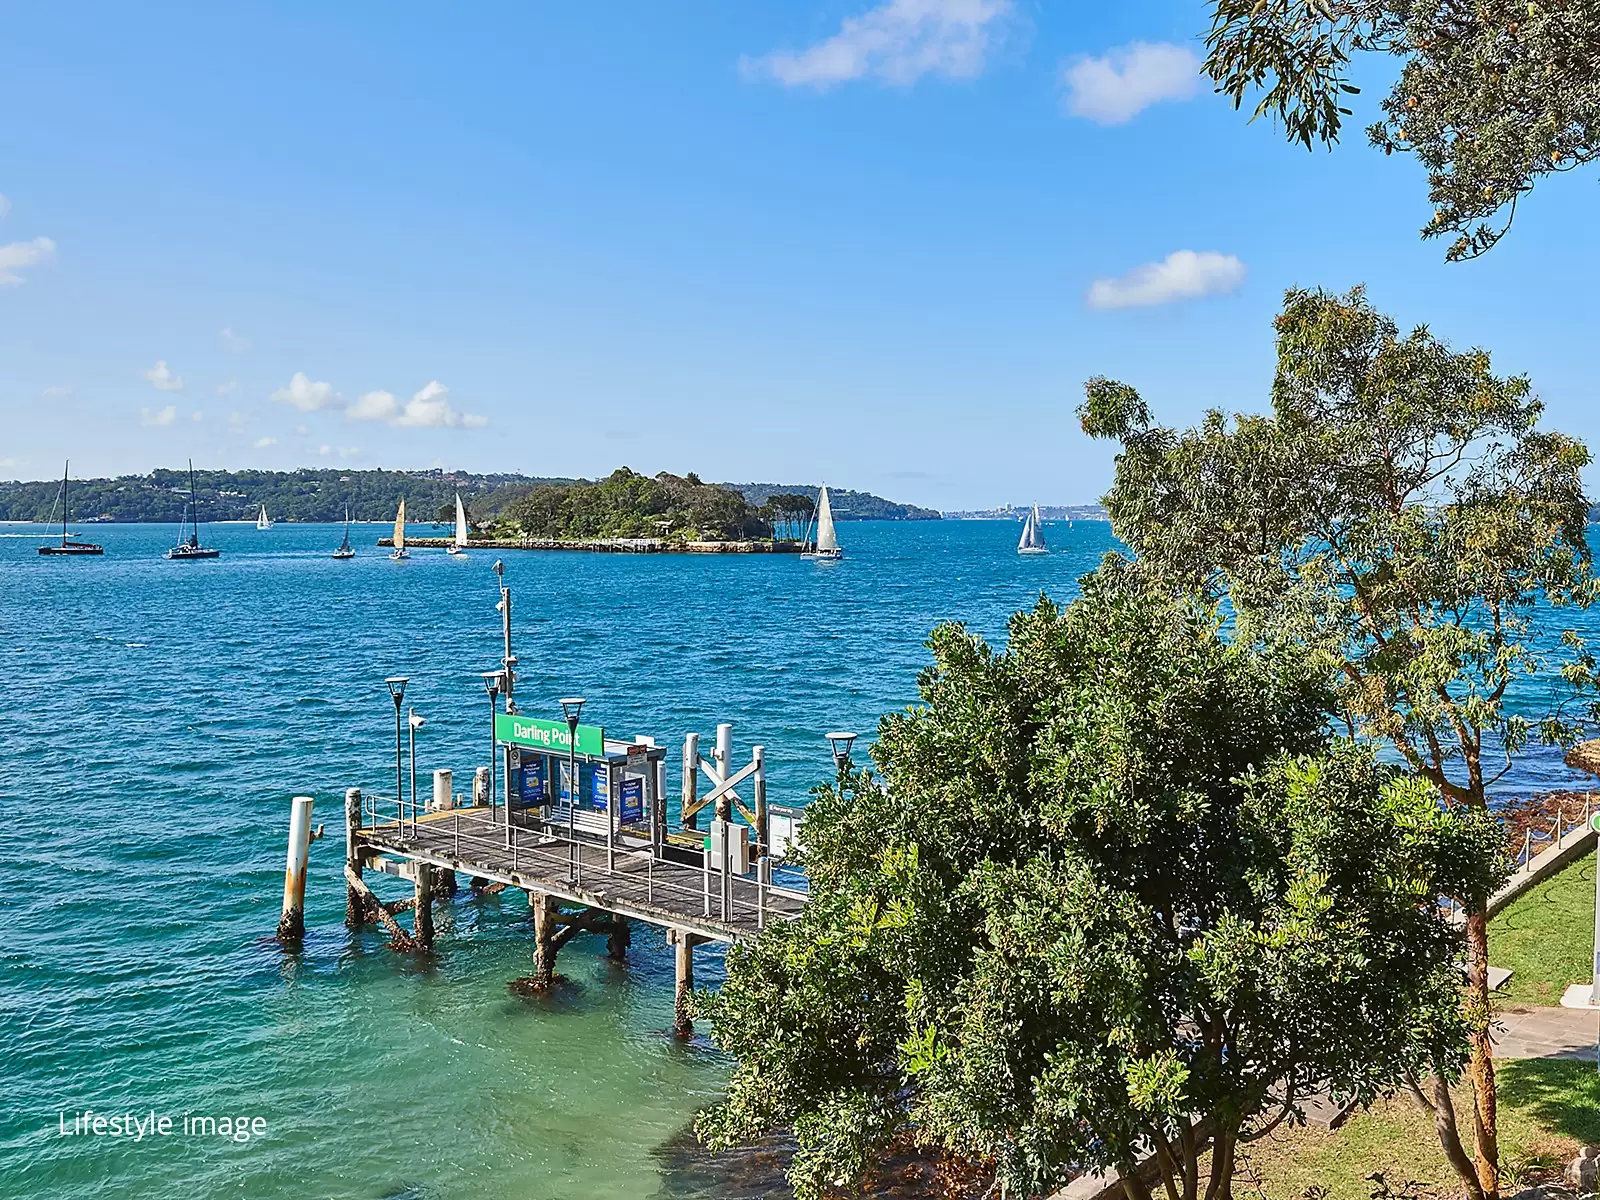 Photo #22: 23/60 Darling Point Road, Darling Point - Sold by Sydney Sotheby's International Realty